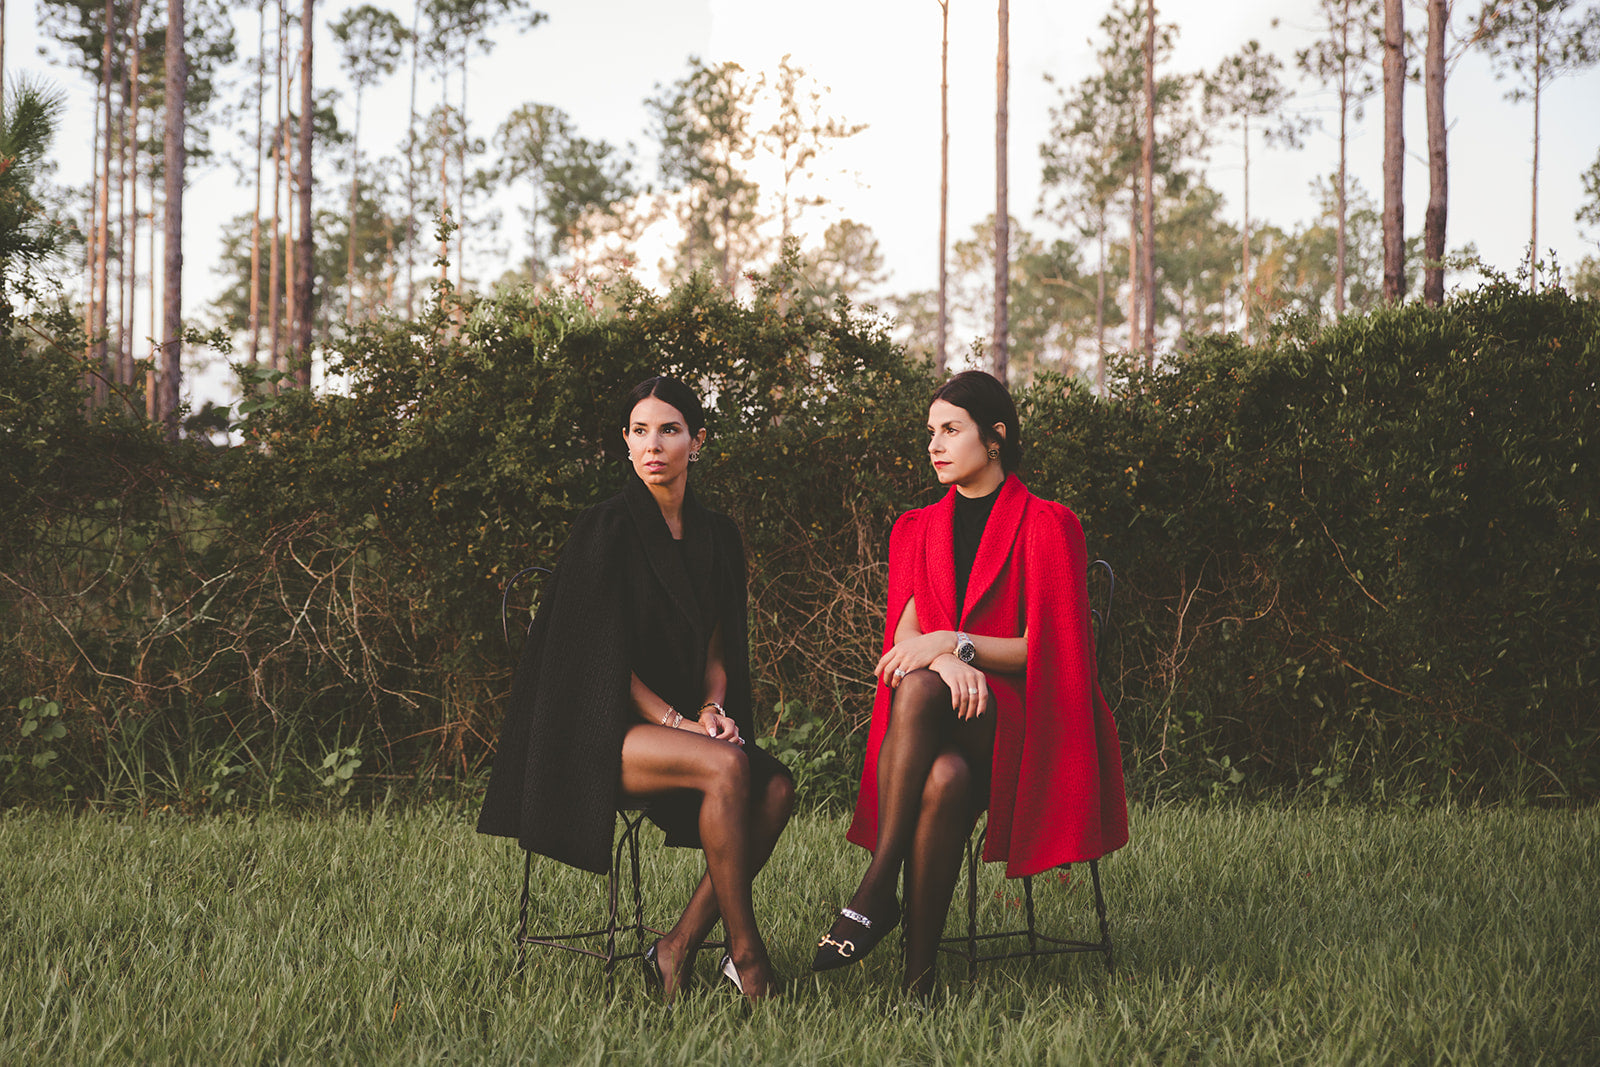 Nina Nieves co-owners, Karol Jimenez Pagano and Kaidy Jimenez Solesky wear the new boucle knit capes, a tweed like fabric in red and black. 